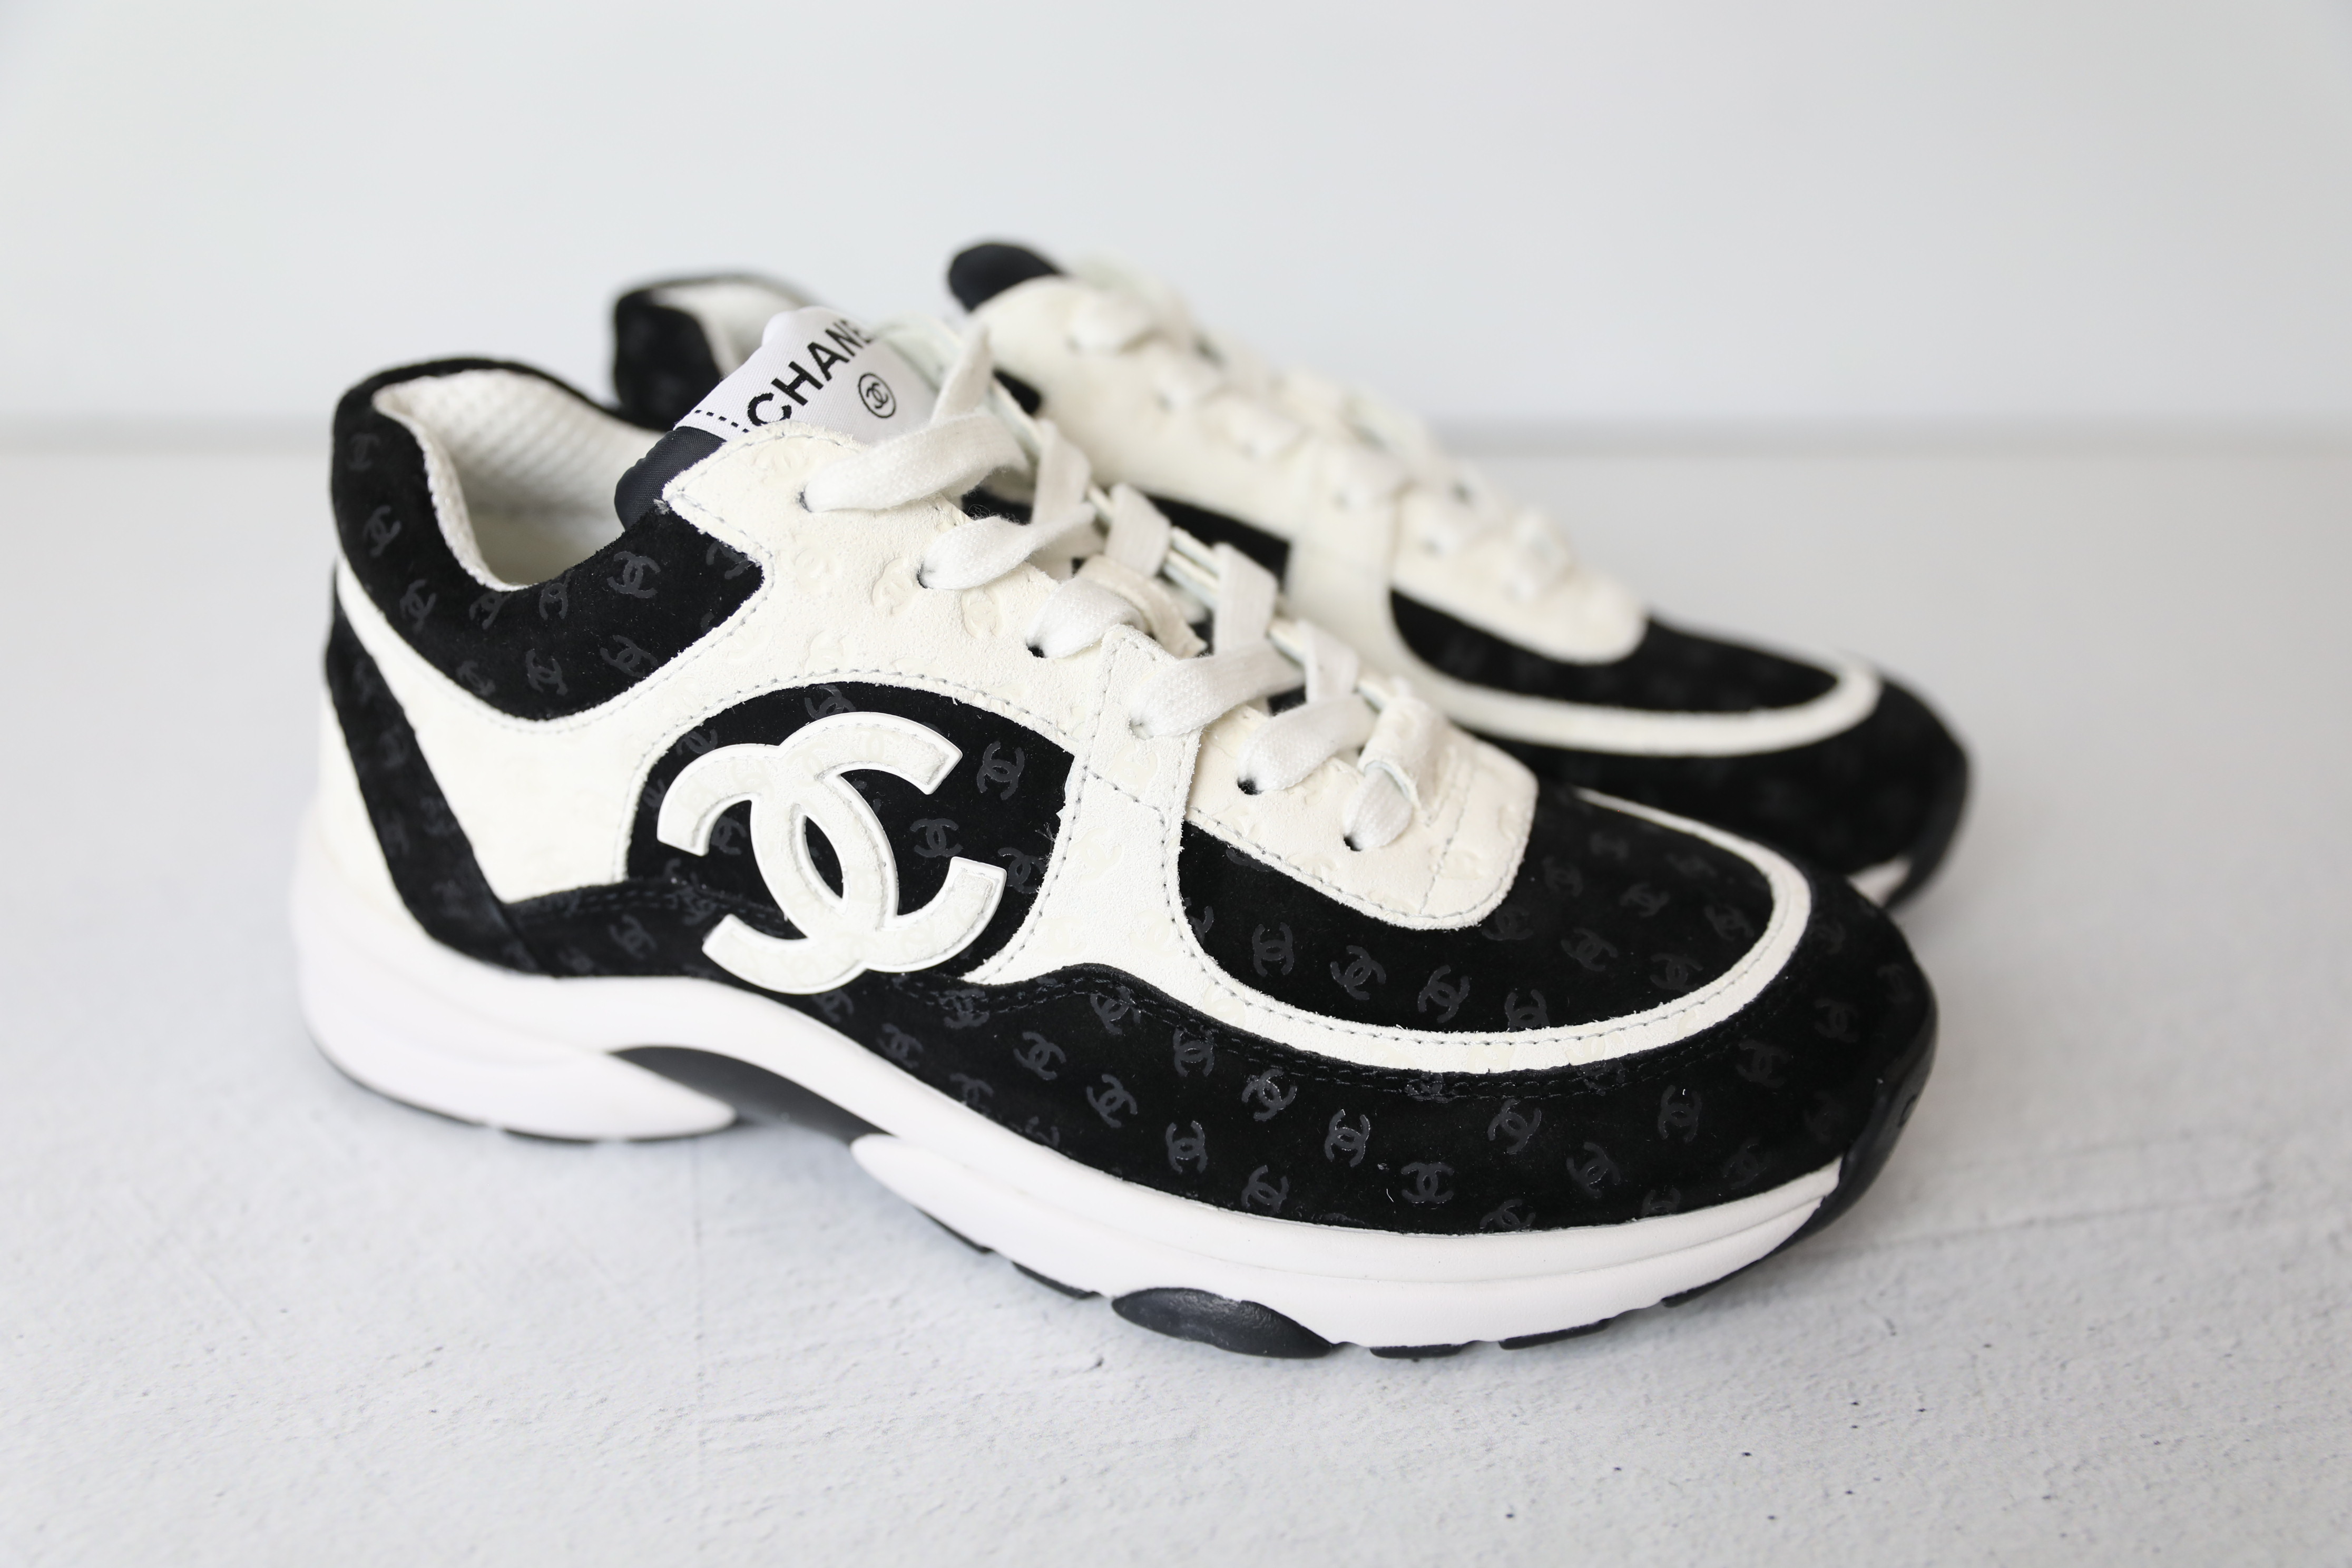 Chanel Shoes Sneakers, Black and White, Size 38, New in Box WA001